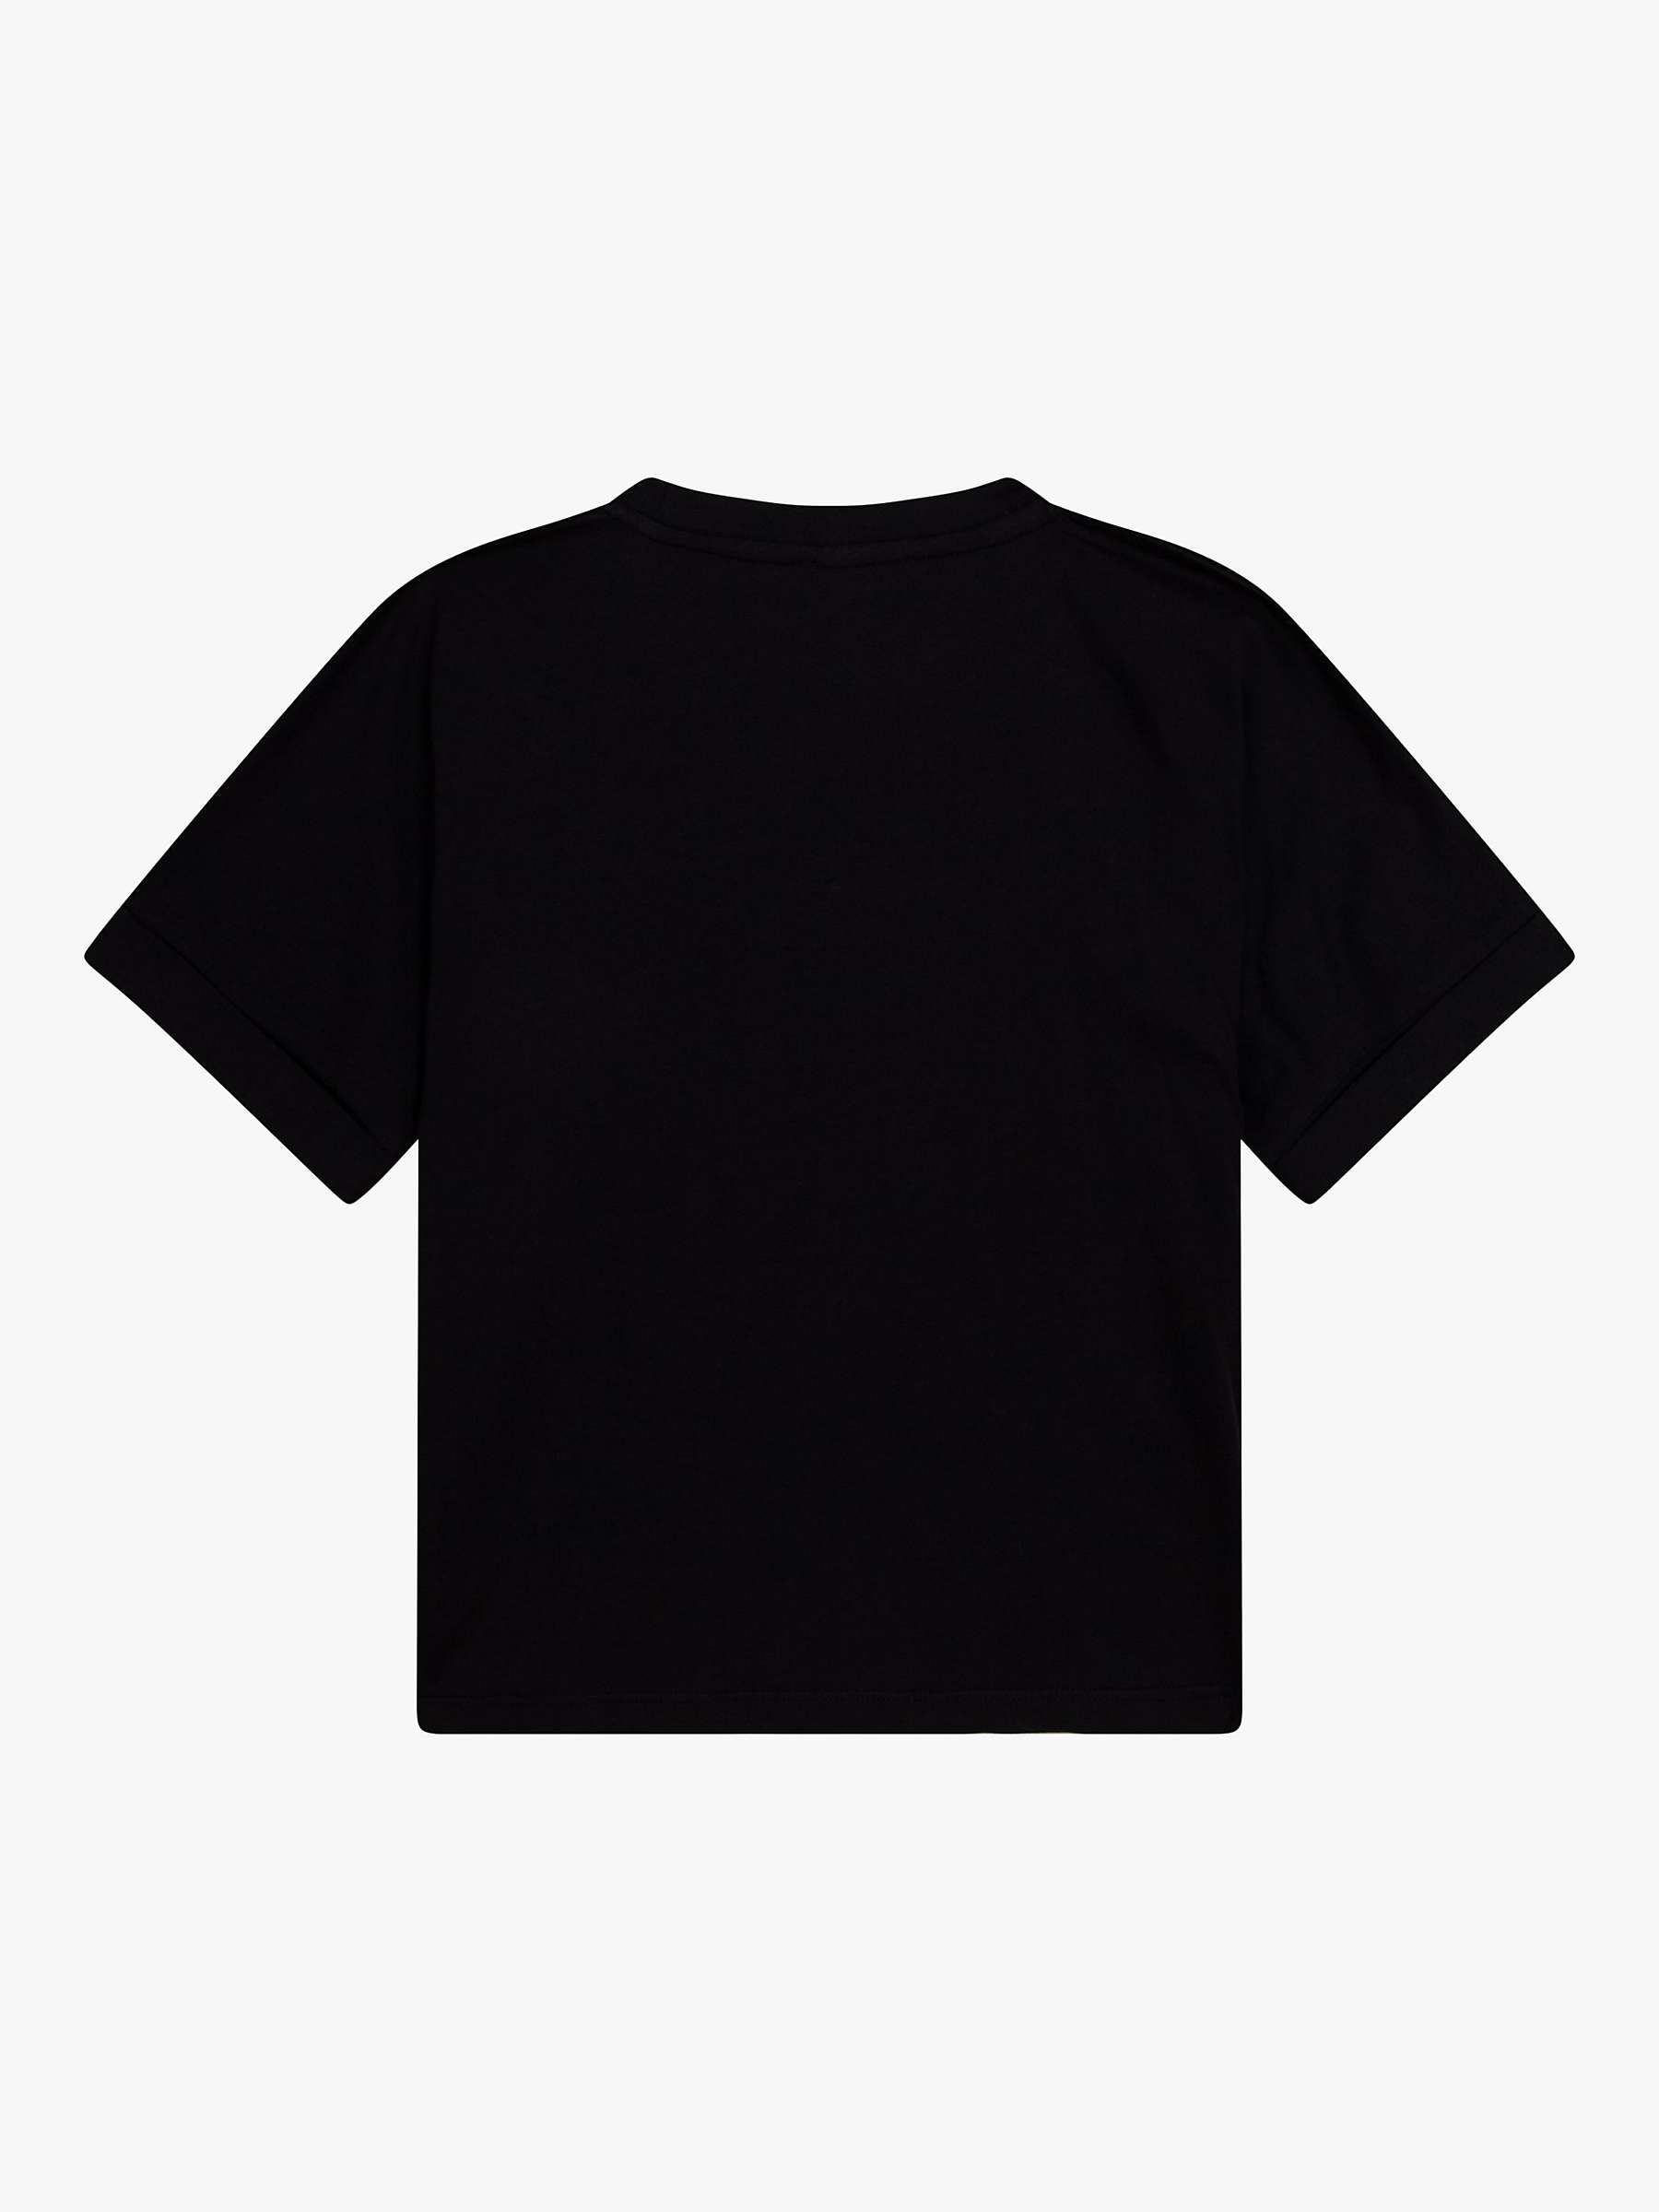 Buy DKNY Kids' Do Your Thing Bold Logo T-Shirt, Black Online at johnlewis.com